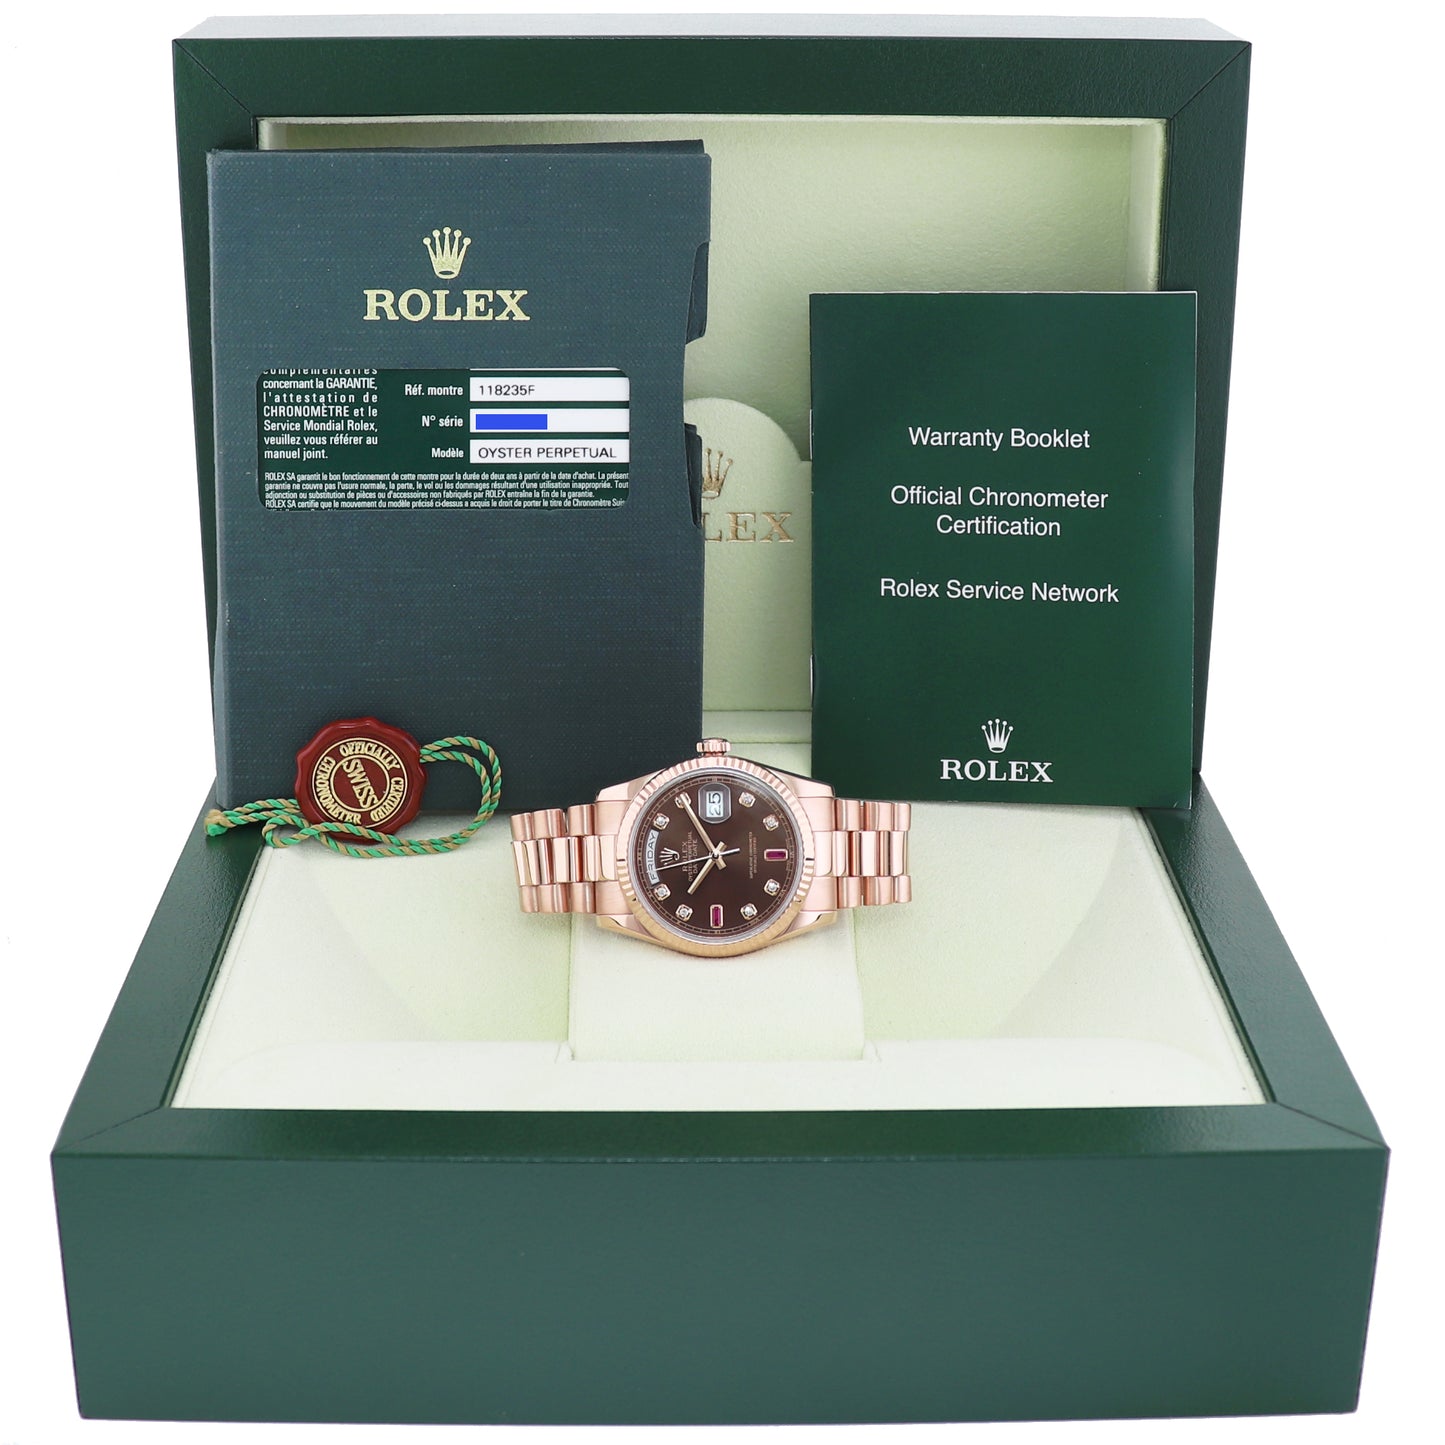 2014 PAPERS Rolex President Day Date Rose Gold 118235 Chocolate Ruby Diamond Watch